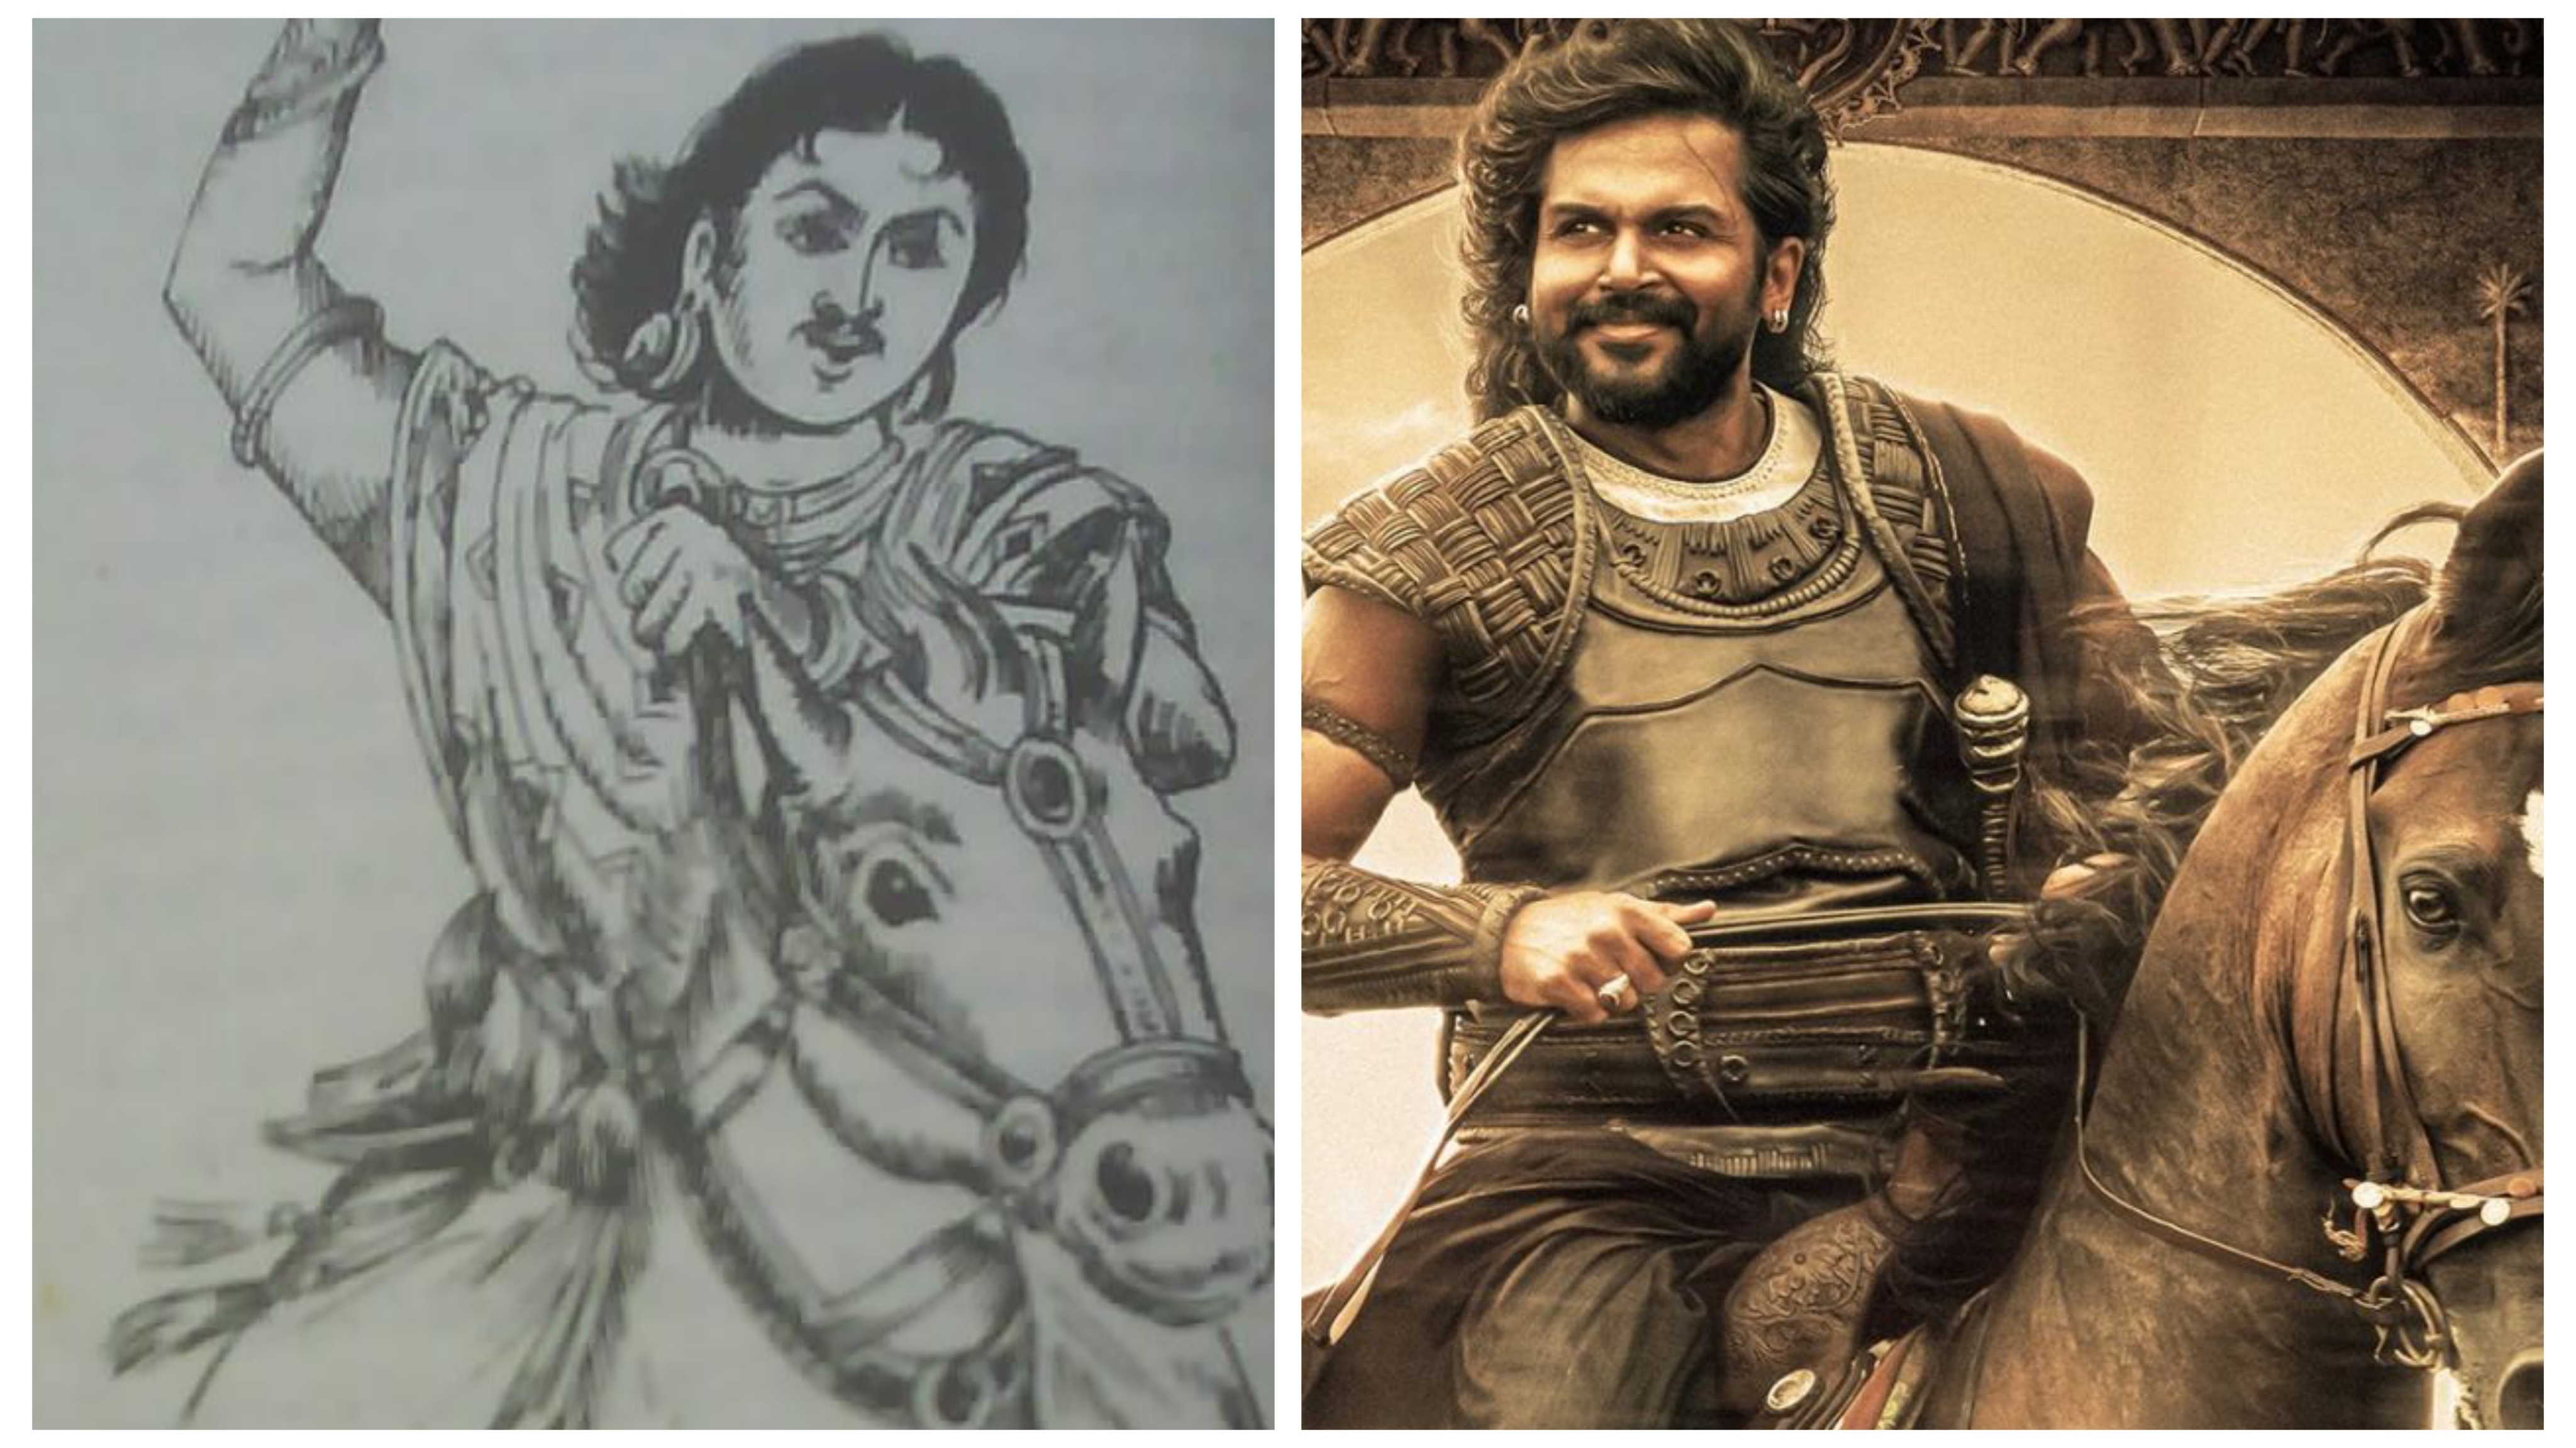 The iconic pose of Vallavaraiyan was recreated for Karthi's character poster for the film.